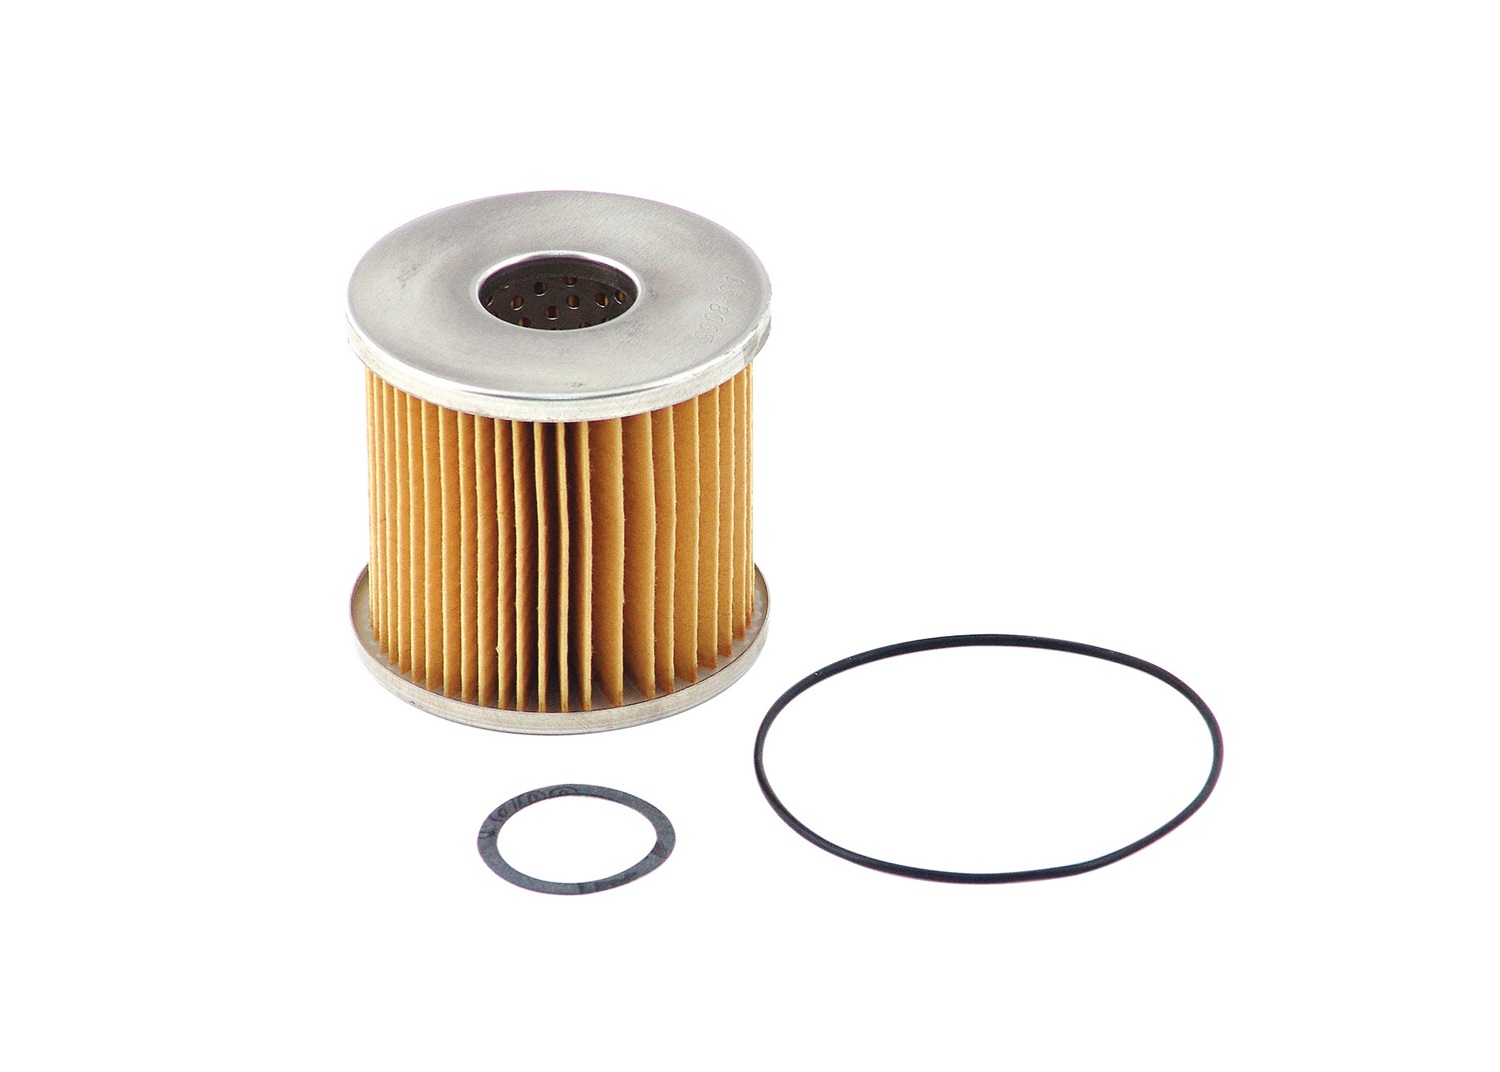 Mallory Mallory 3161 Fuel Filter Element